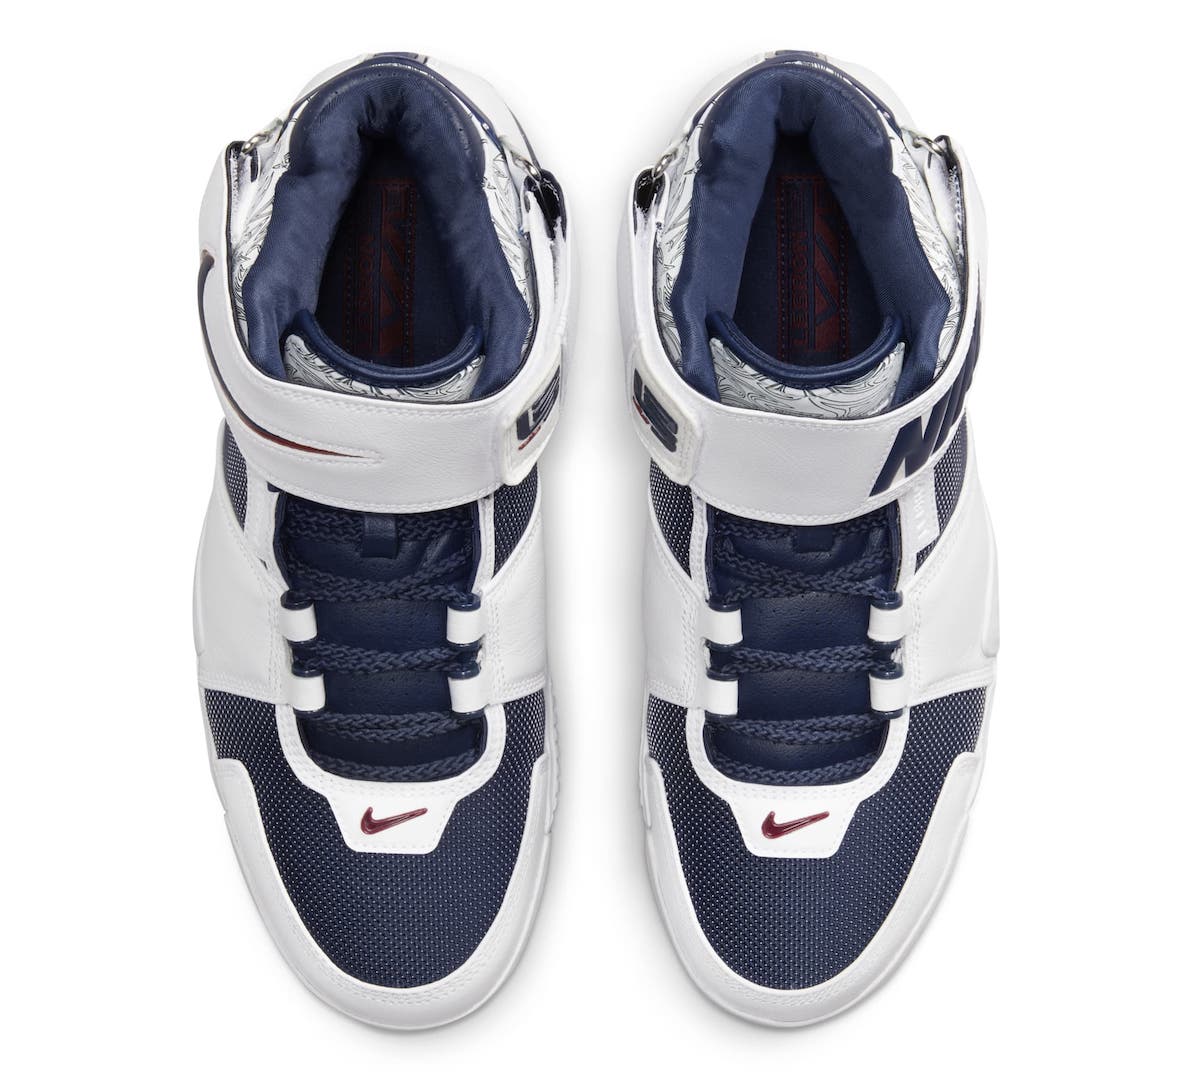 Nike-LeBron-2-USA-Midnight-Navy-2022-DR0826-100-Release-Date-4-1.jpeg